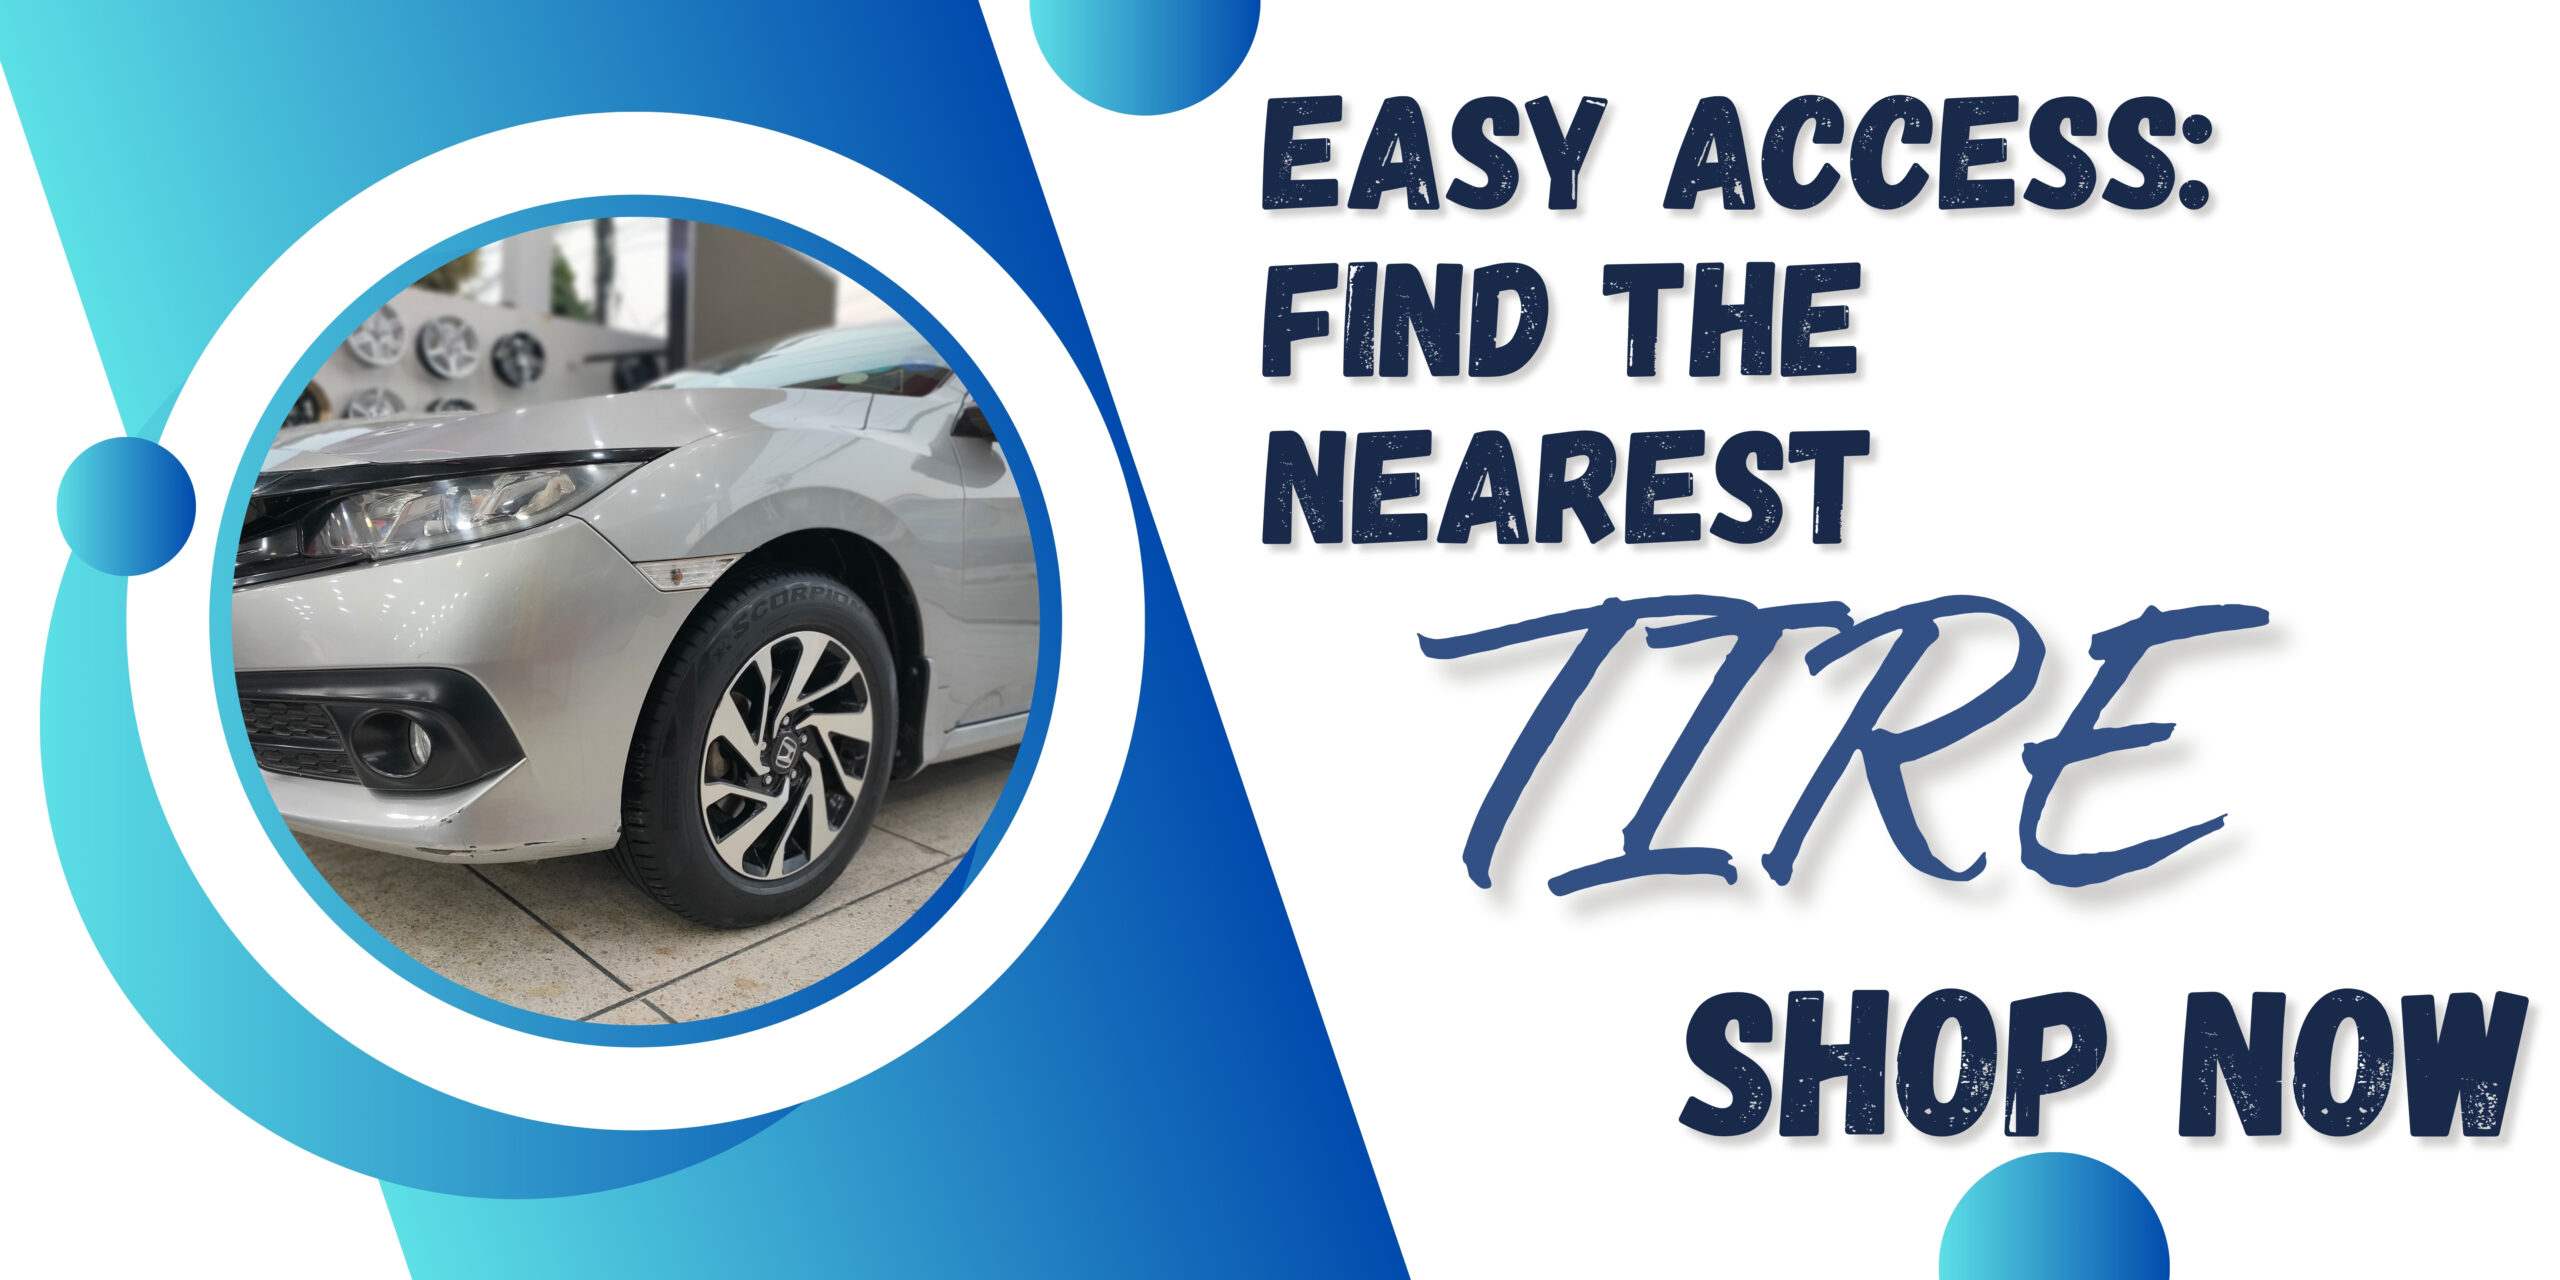 Easy Access: Find the Nearest Tyre Shop Now